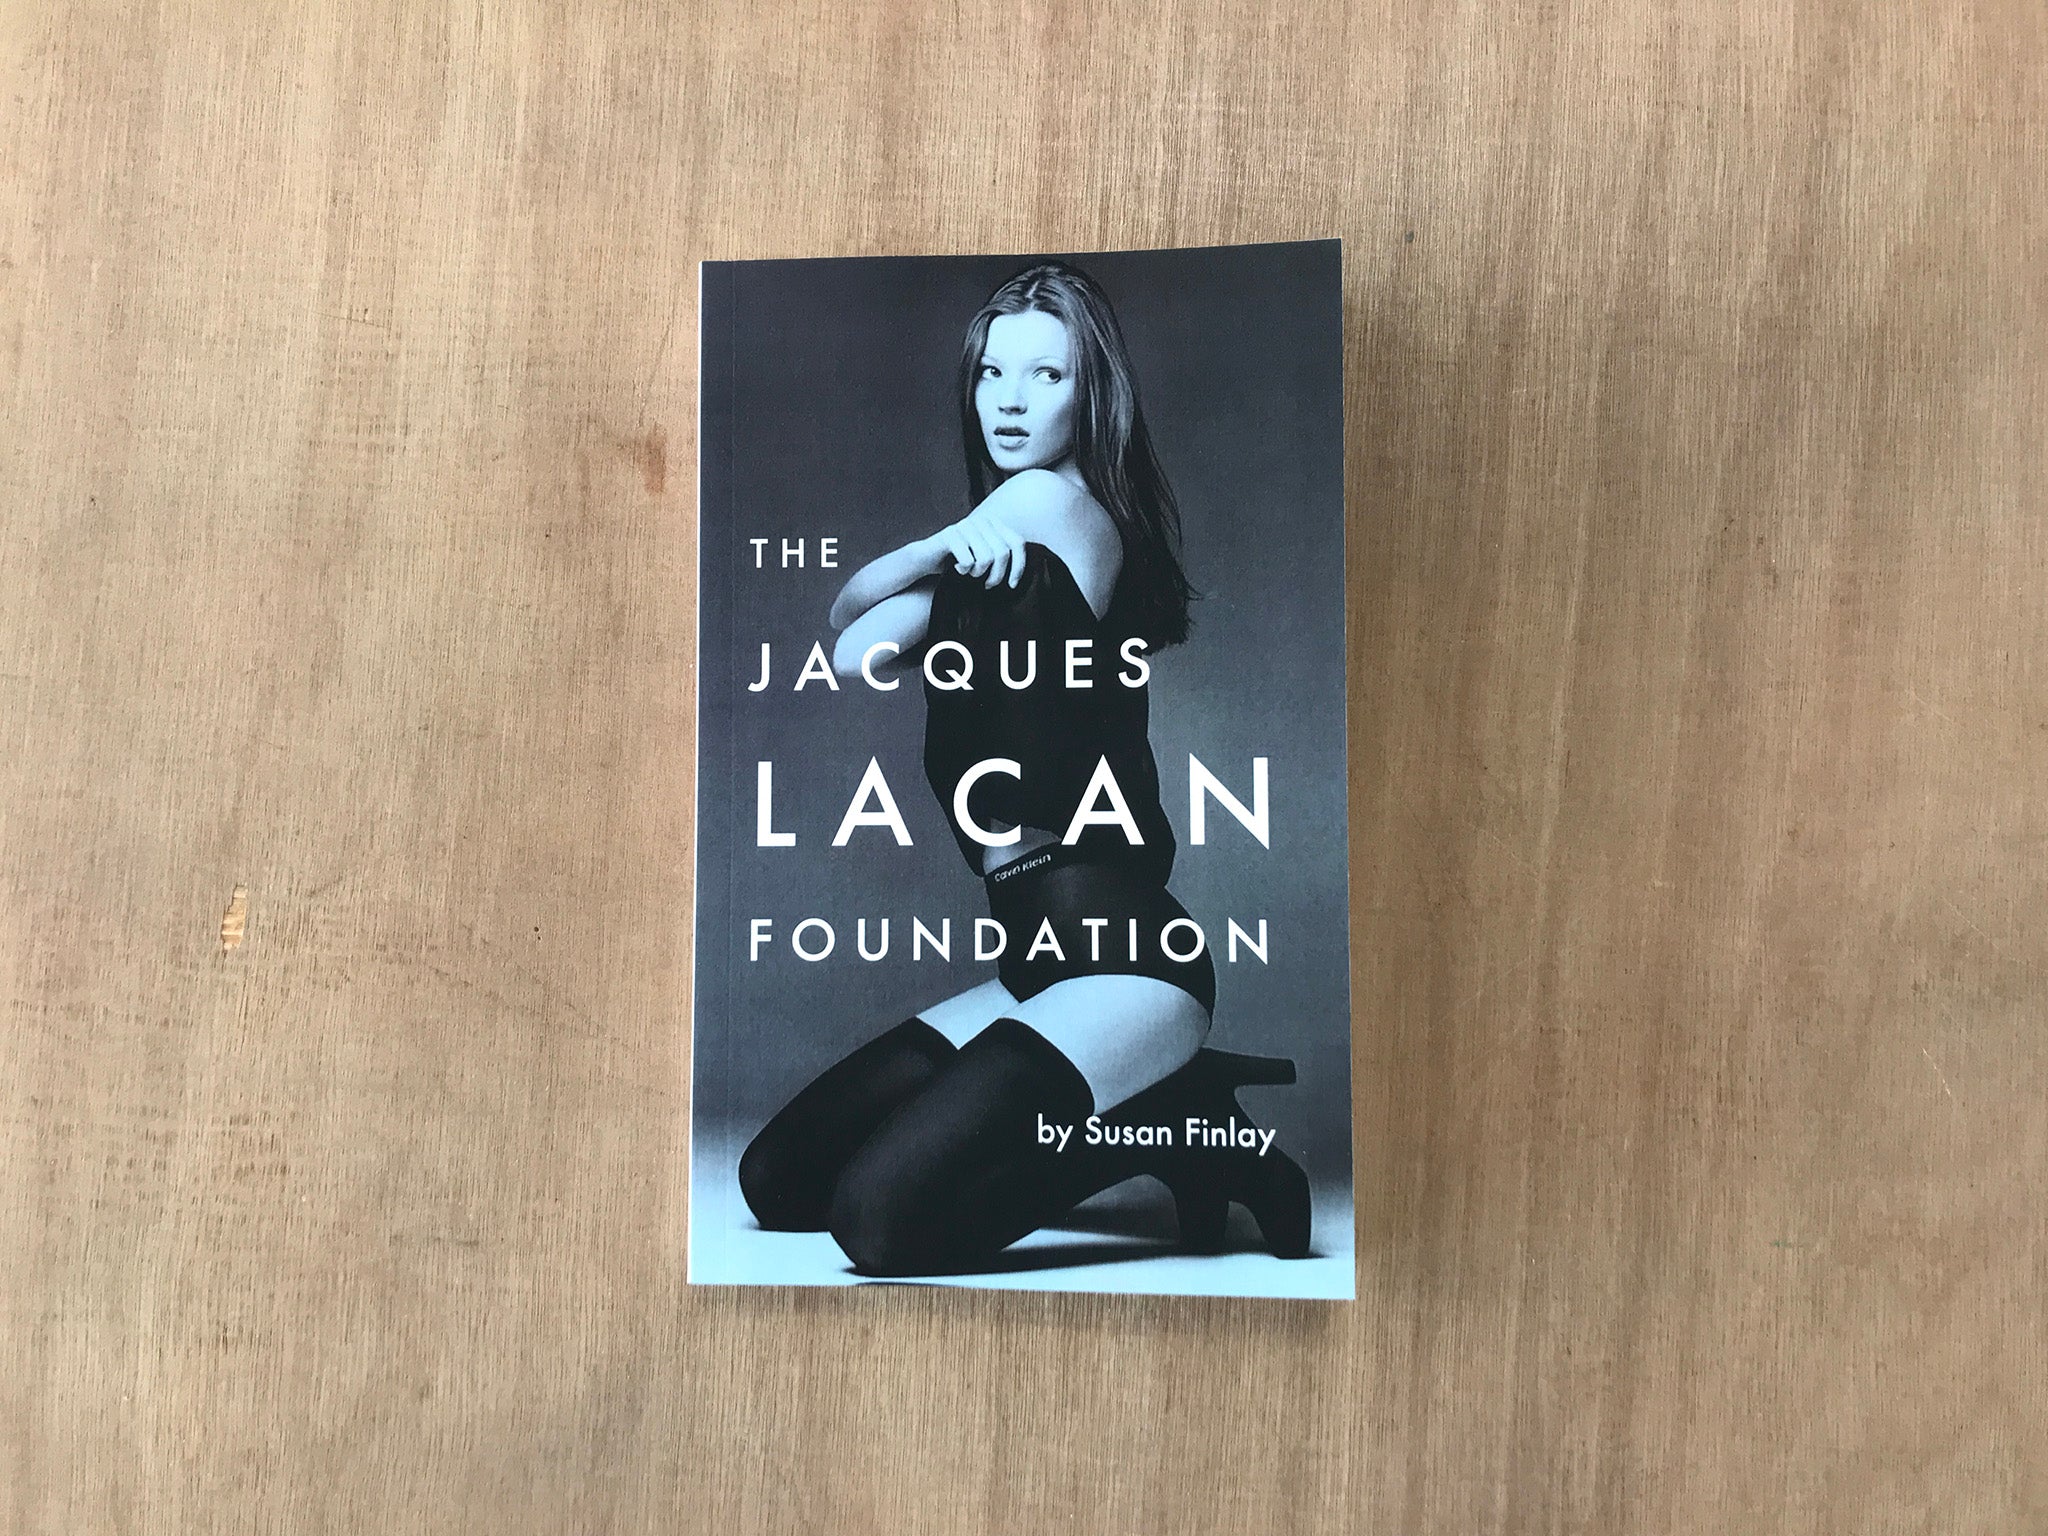 THE JACQUES LACAN FOUNDATION by Susan Finlay